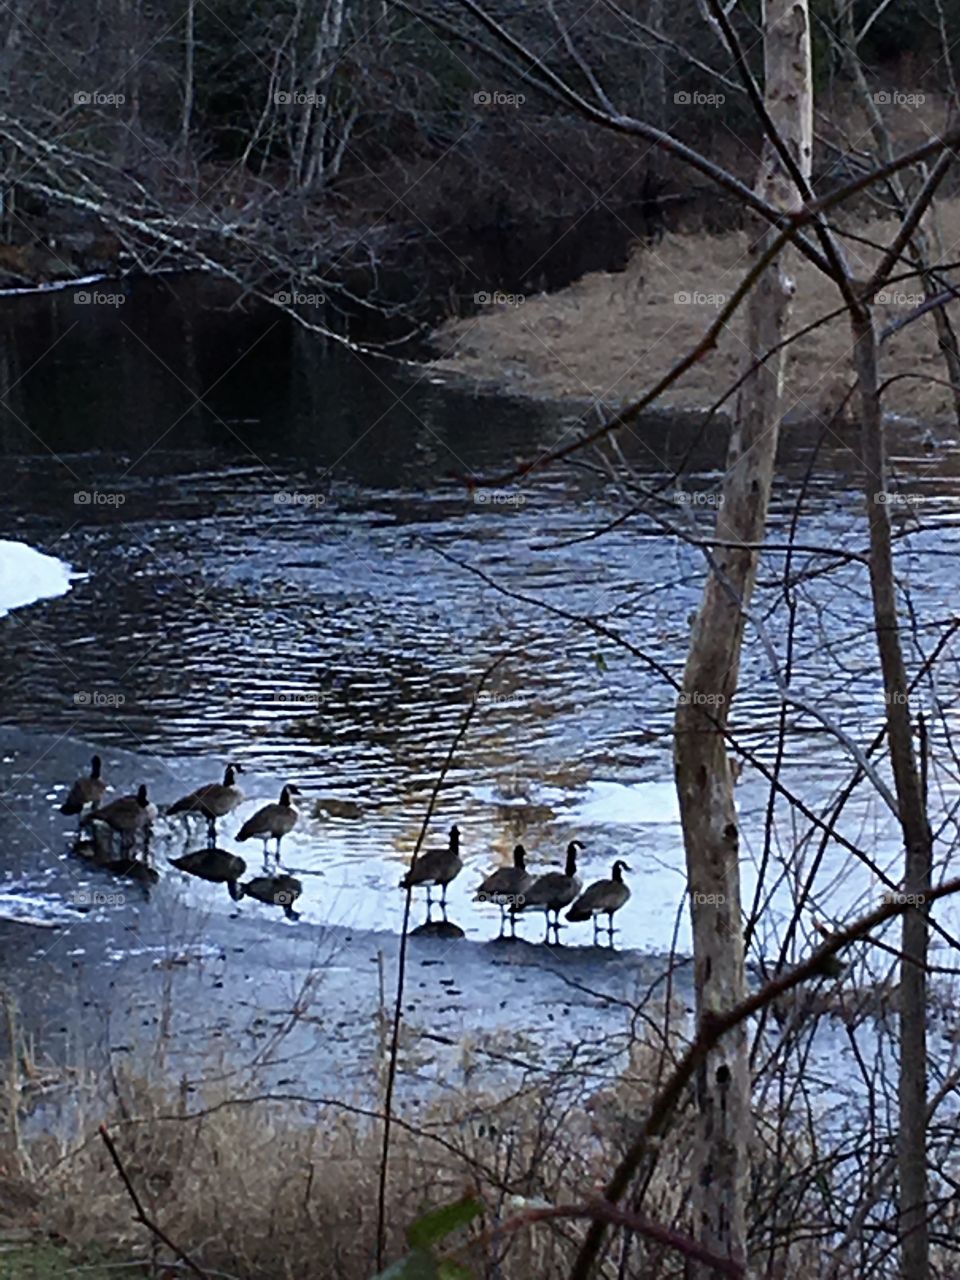 Ducks, geese near waters edge. Cold day, river nearby where they gather. Trees protect. Evening.